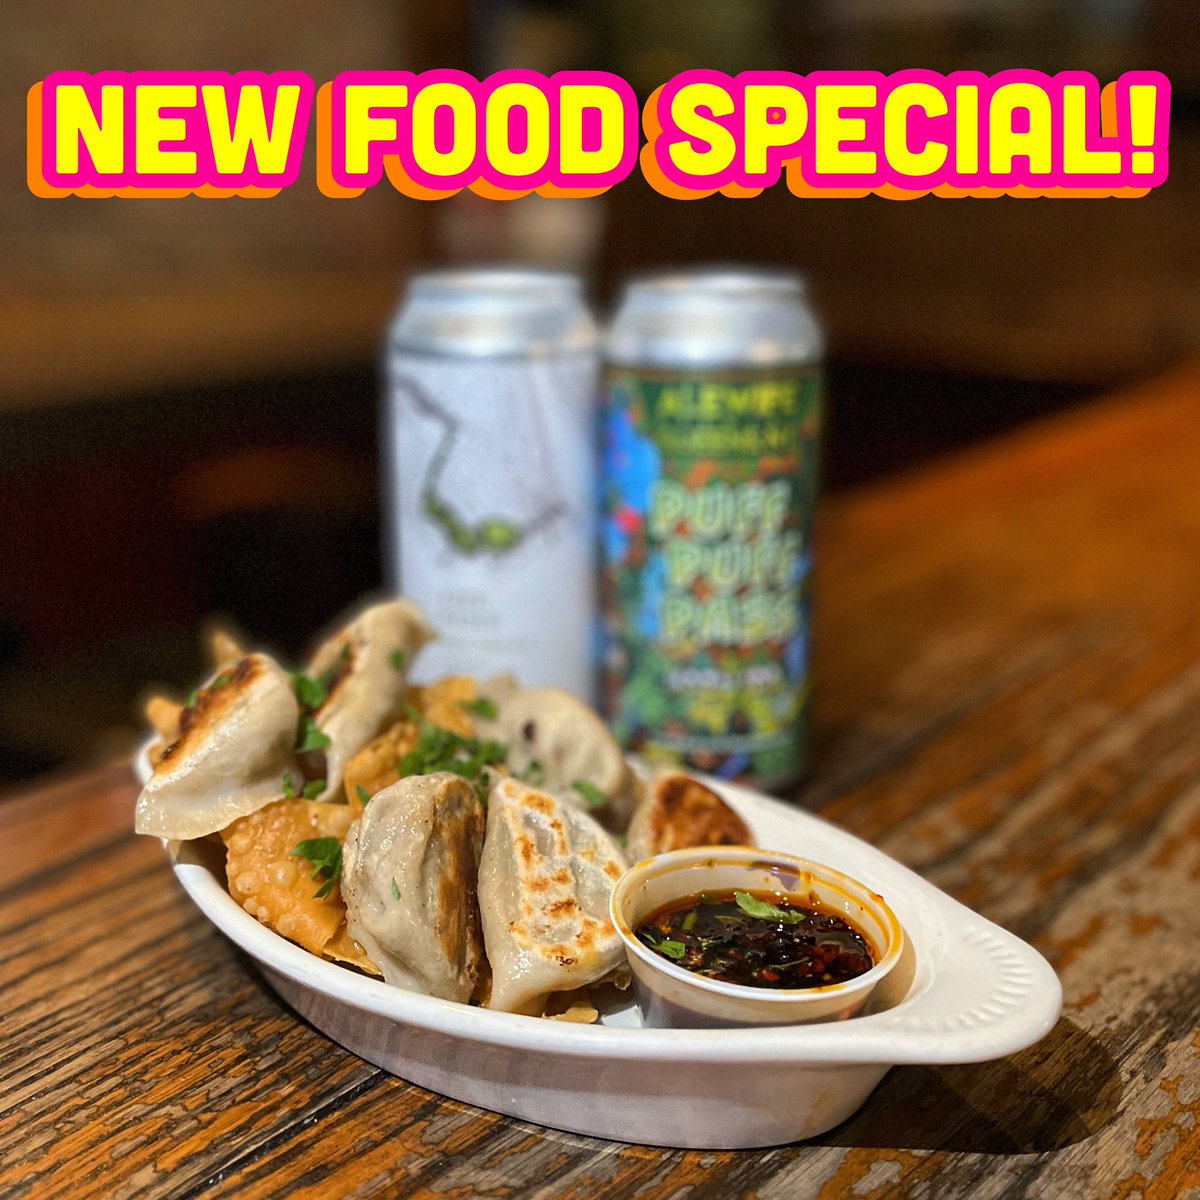 For a limited time 👉 GK DUMPLINGS! Your choice of pork/sage or veggie dumplings served with fried wontons and a side of GK Triple S sauce🥟 Pairs great with a hoppy beer!🍻 #comeandgetit #georgekeeley #gknyc #beerisgood #drinkrealbeer #drinkamongstfriends #shutupanddrink #cheers